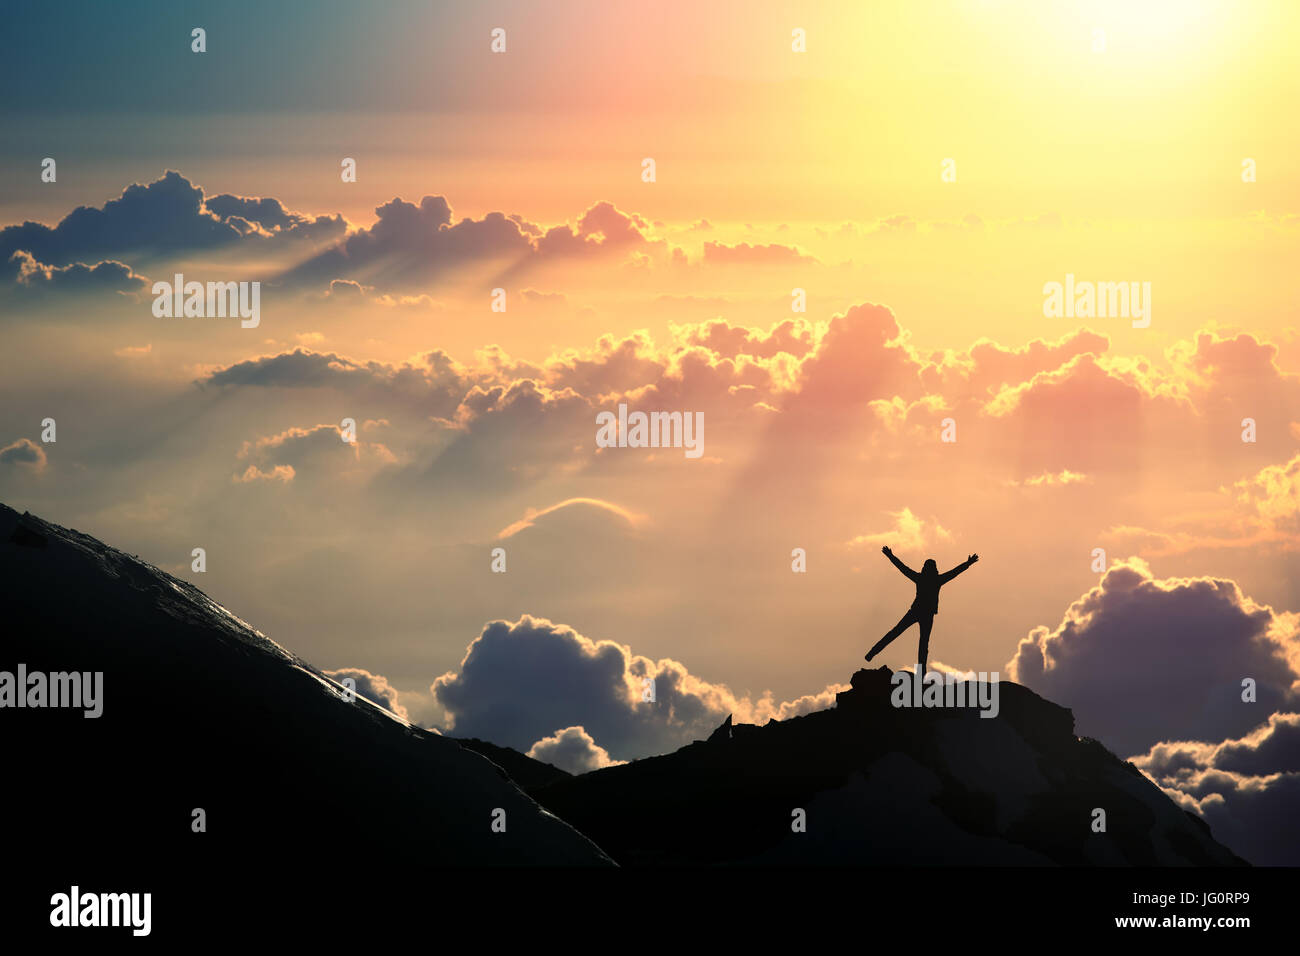 A person is standing on the top of the mountain above the clouds. Stock Photo